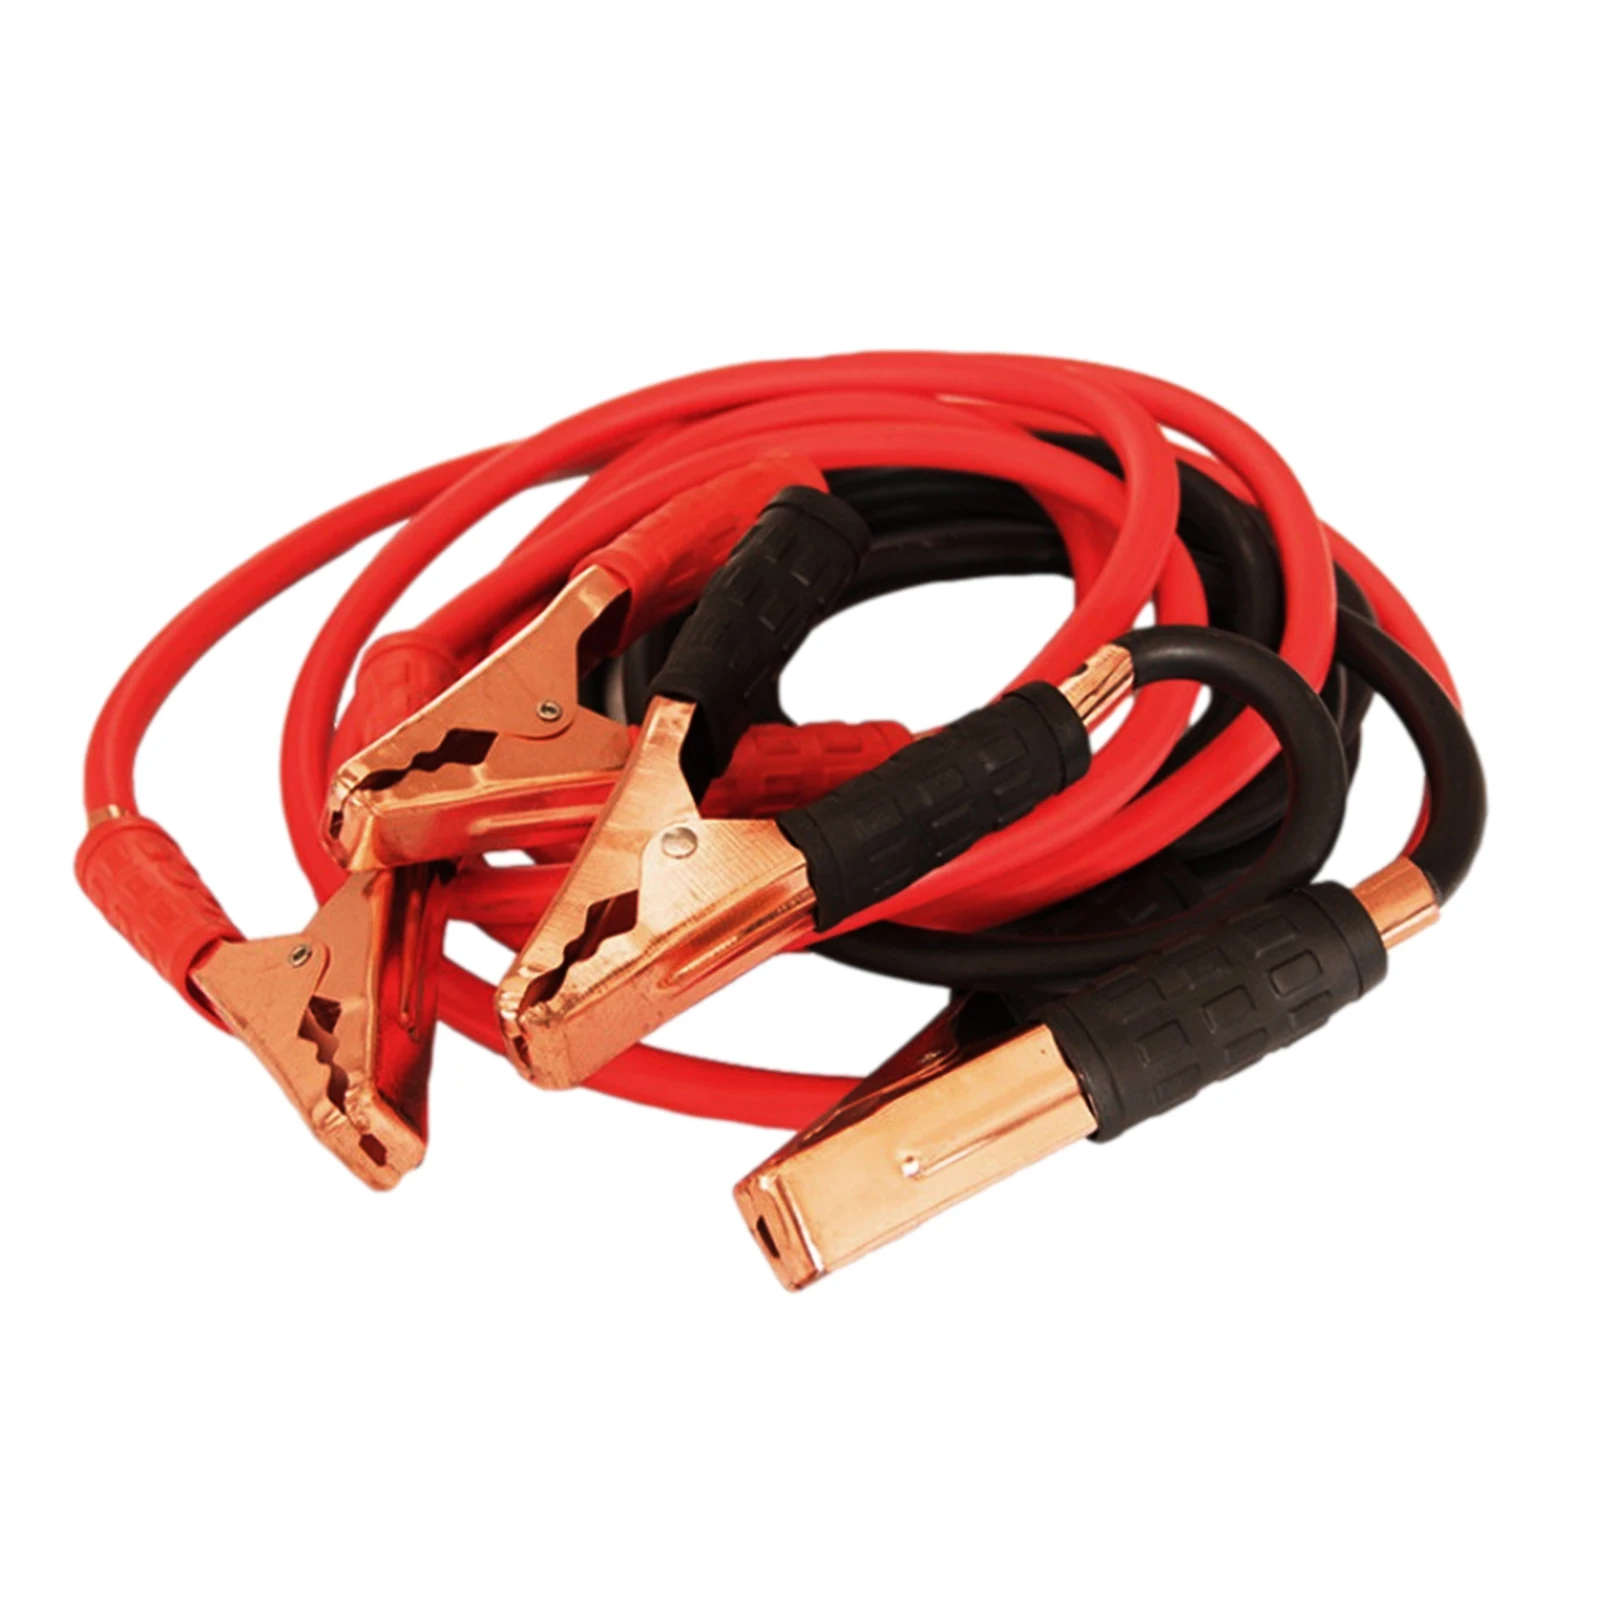 

4 Meters 500A Battery Clip Car Leads Booster Cable PVC Thicken Battery Jump Start Leads Cable Black Red Fire Wires For Impart